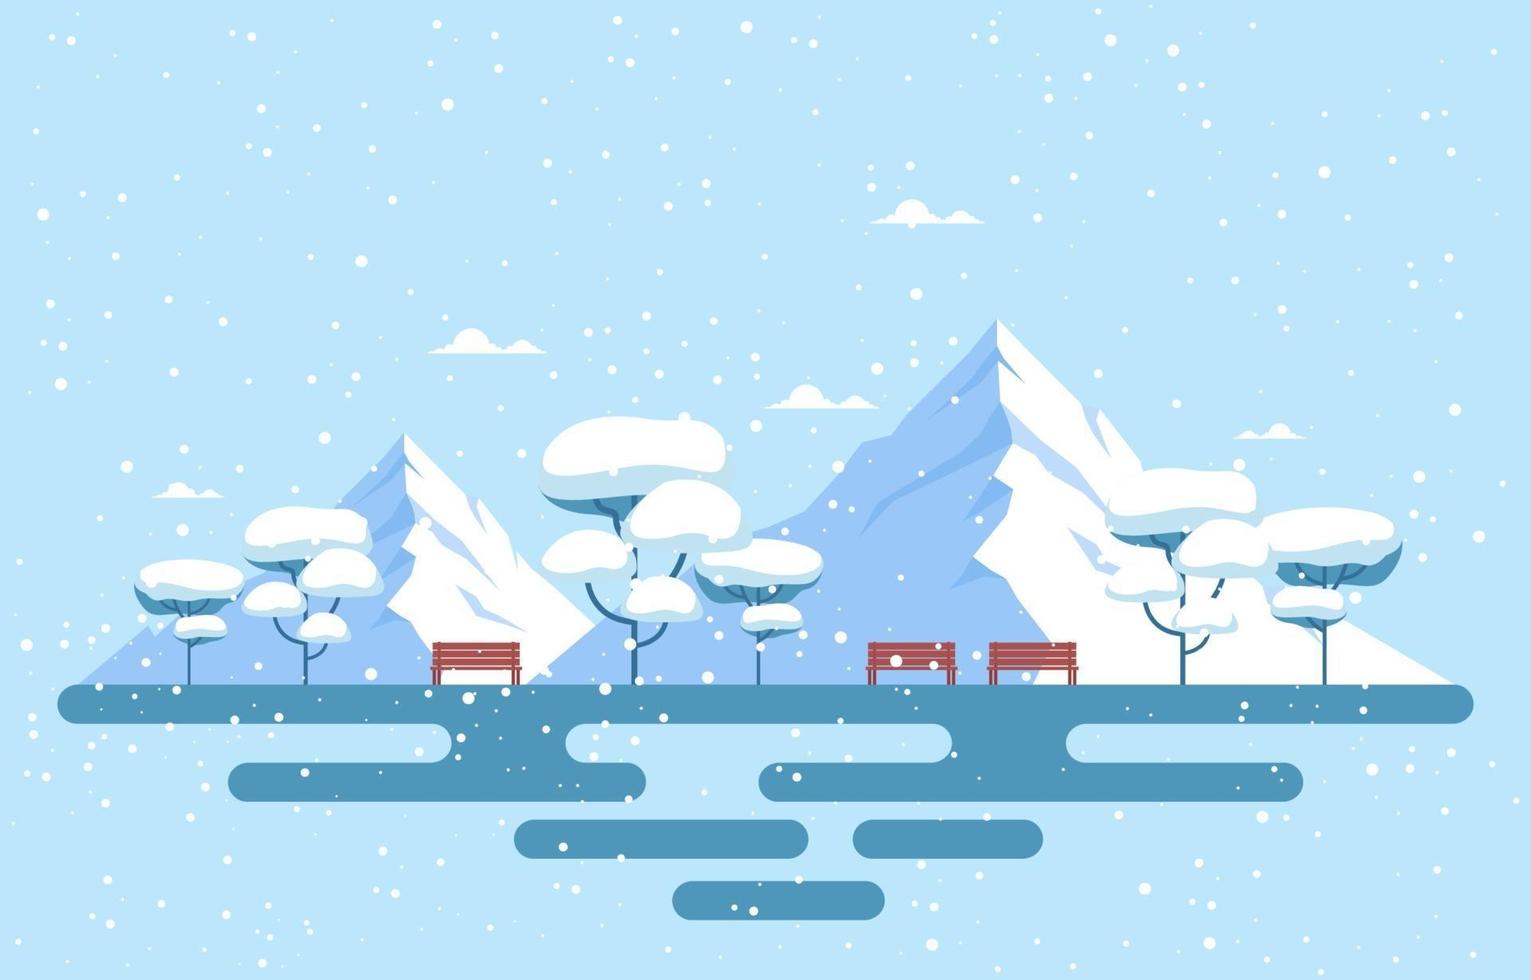 Snowy Winter Park Scene with Mountains, Benches and Trees vector